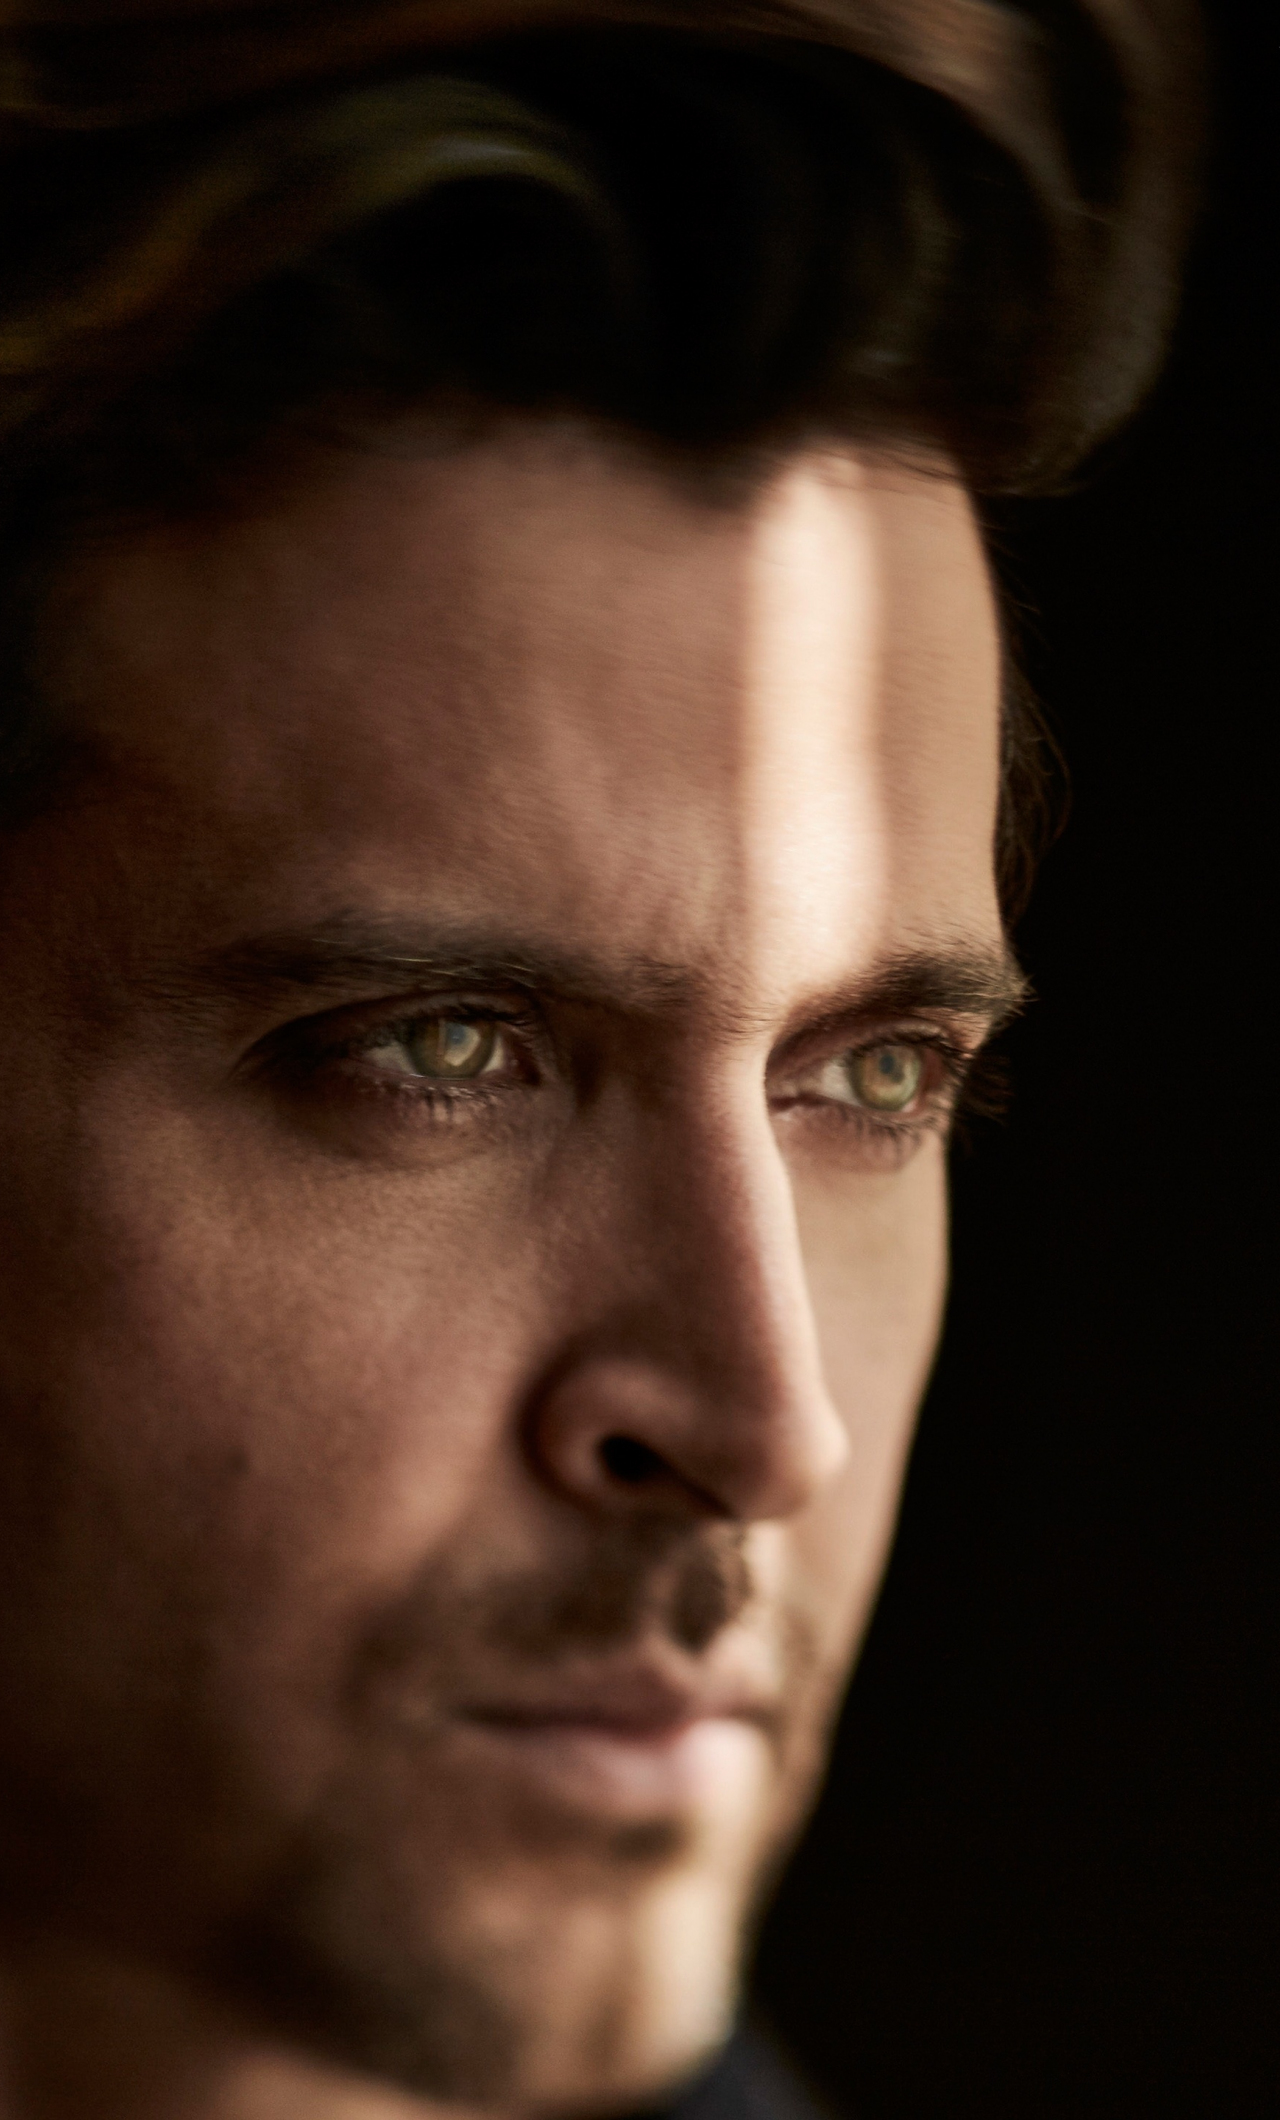 Download wallpaper 1280x2120 hrithik roshan, bollywood actor, 2018, iphone  6 plus, 1280x2120 hd background, 9985